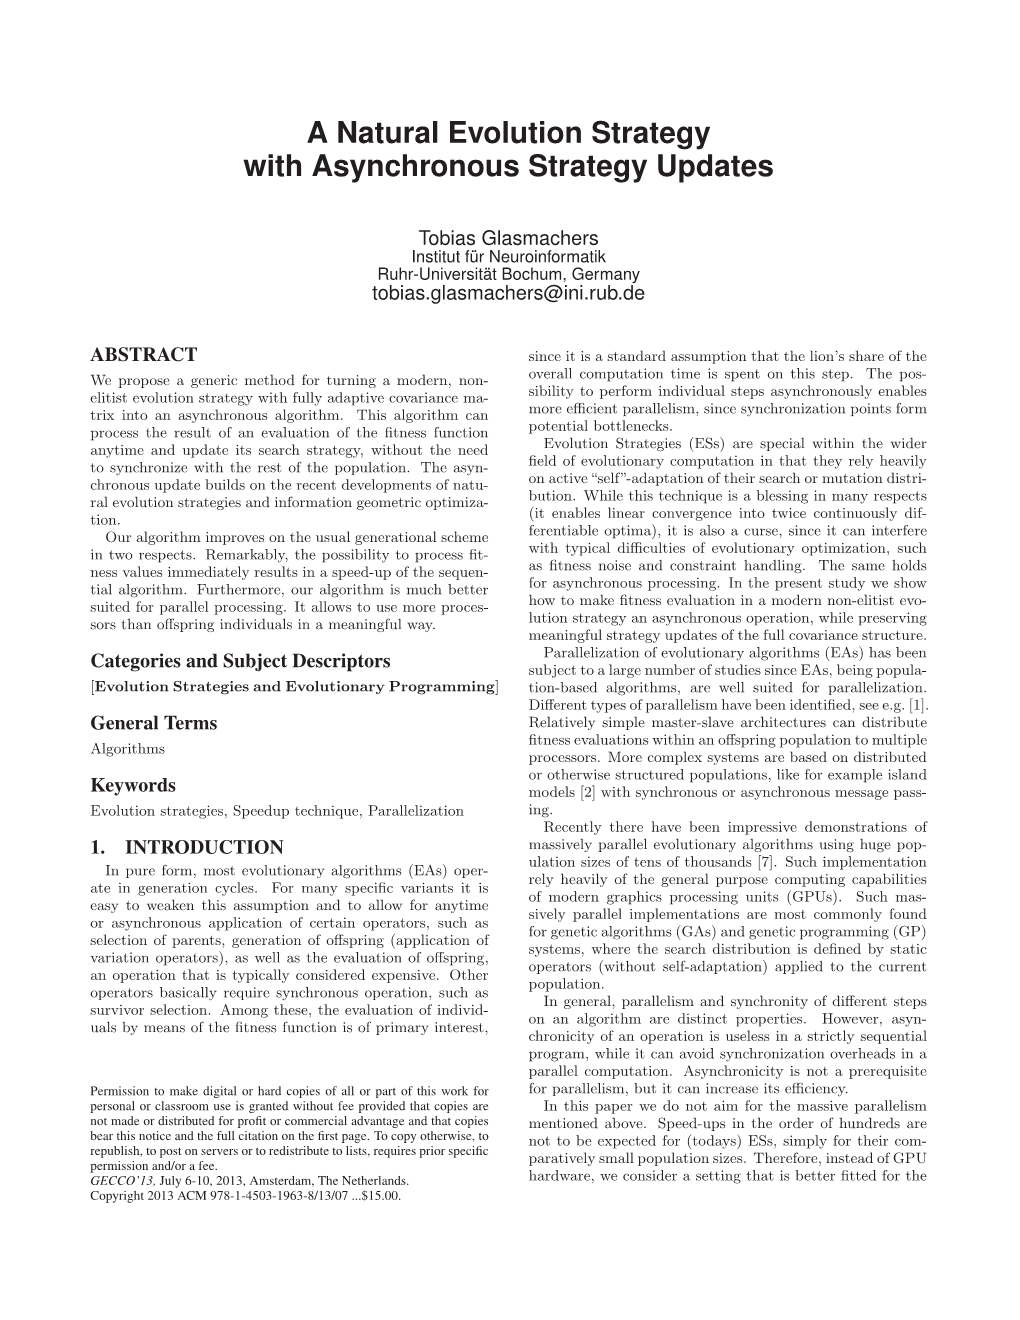 A Natural Evolution Strategy with Asynchronous Strategy Updates